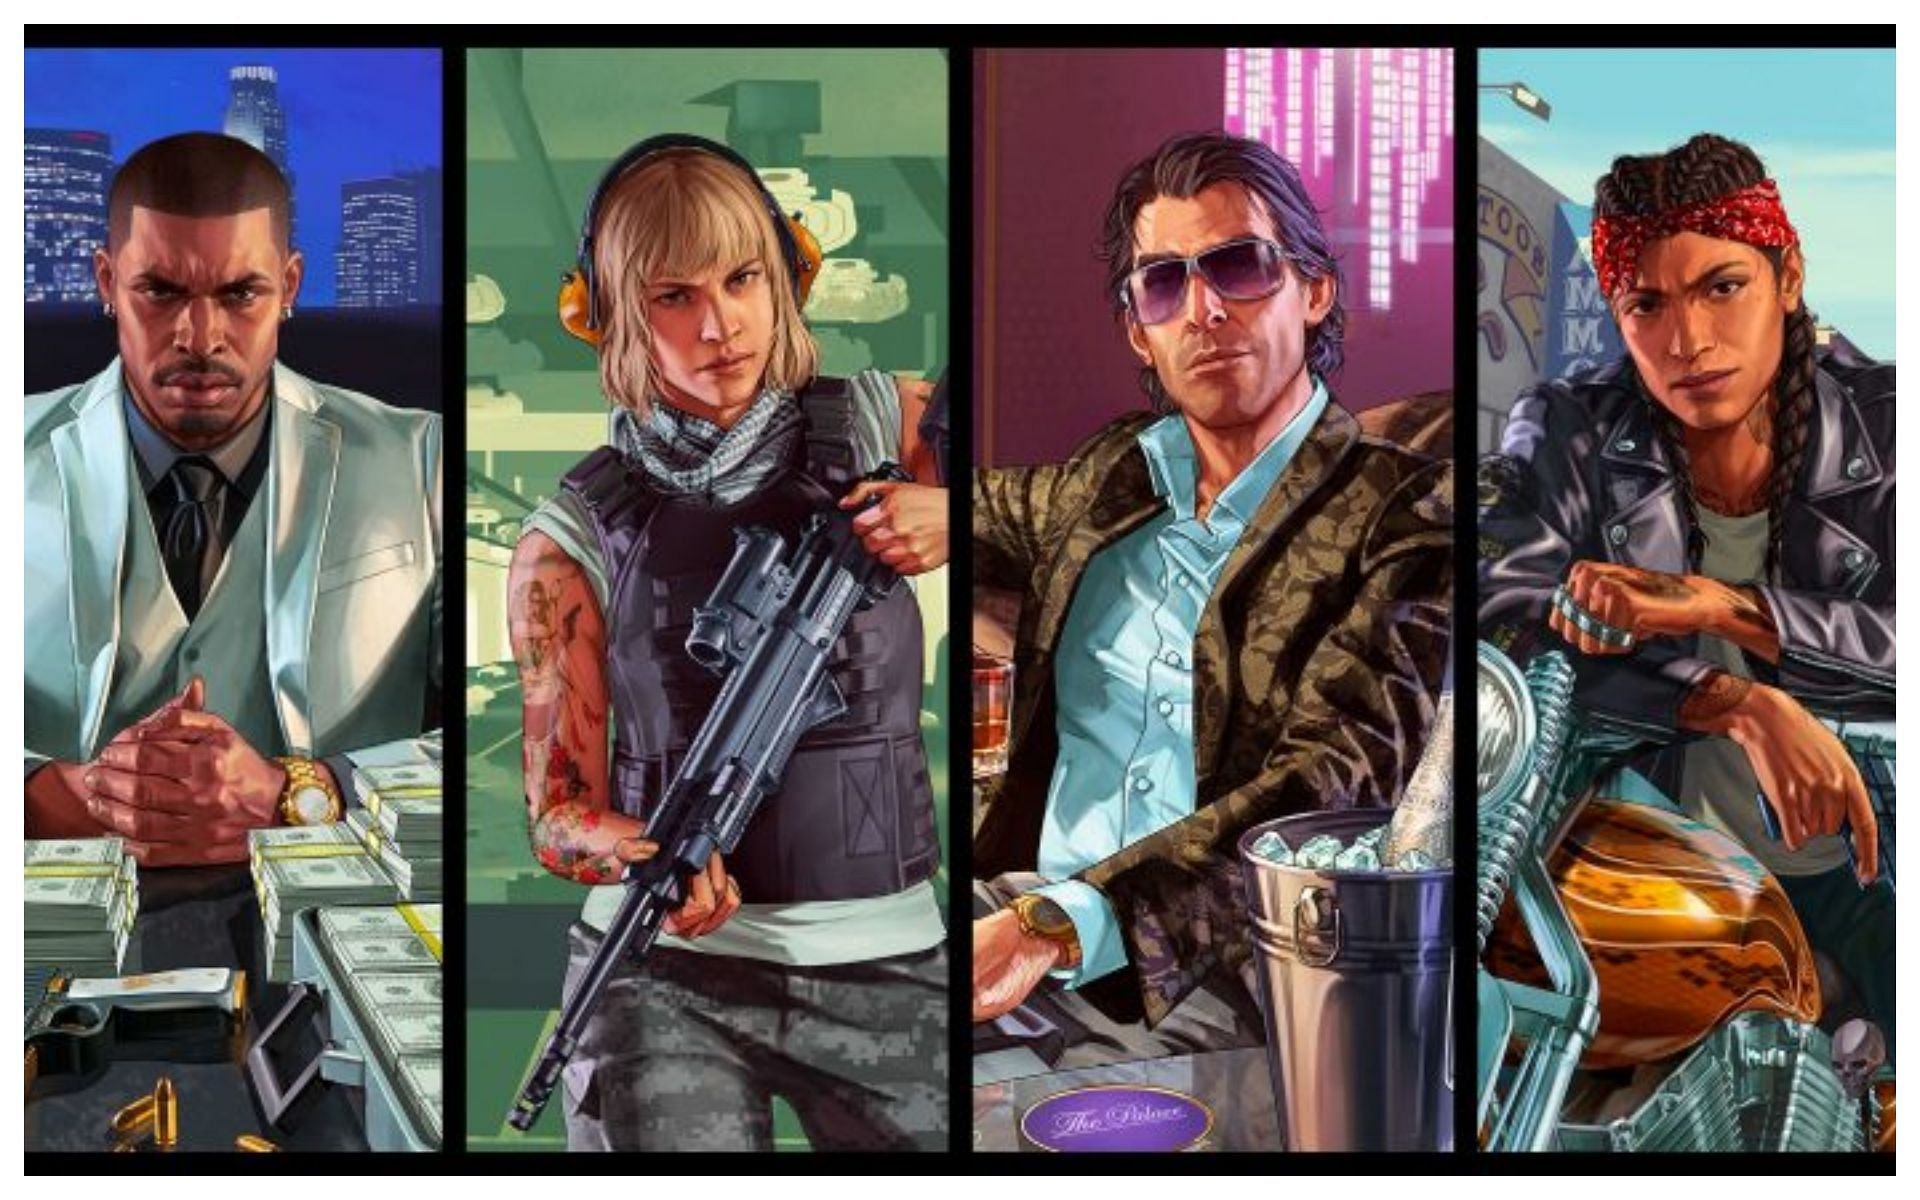 Business models to choose from in GTA 5 Expanded &amp; Enhanced (Image via Rockstar)